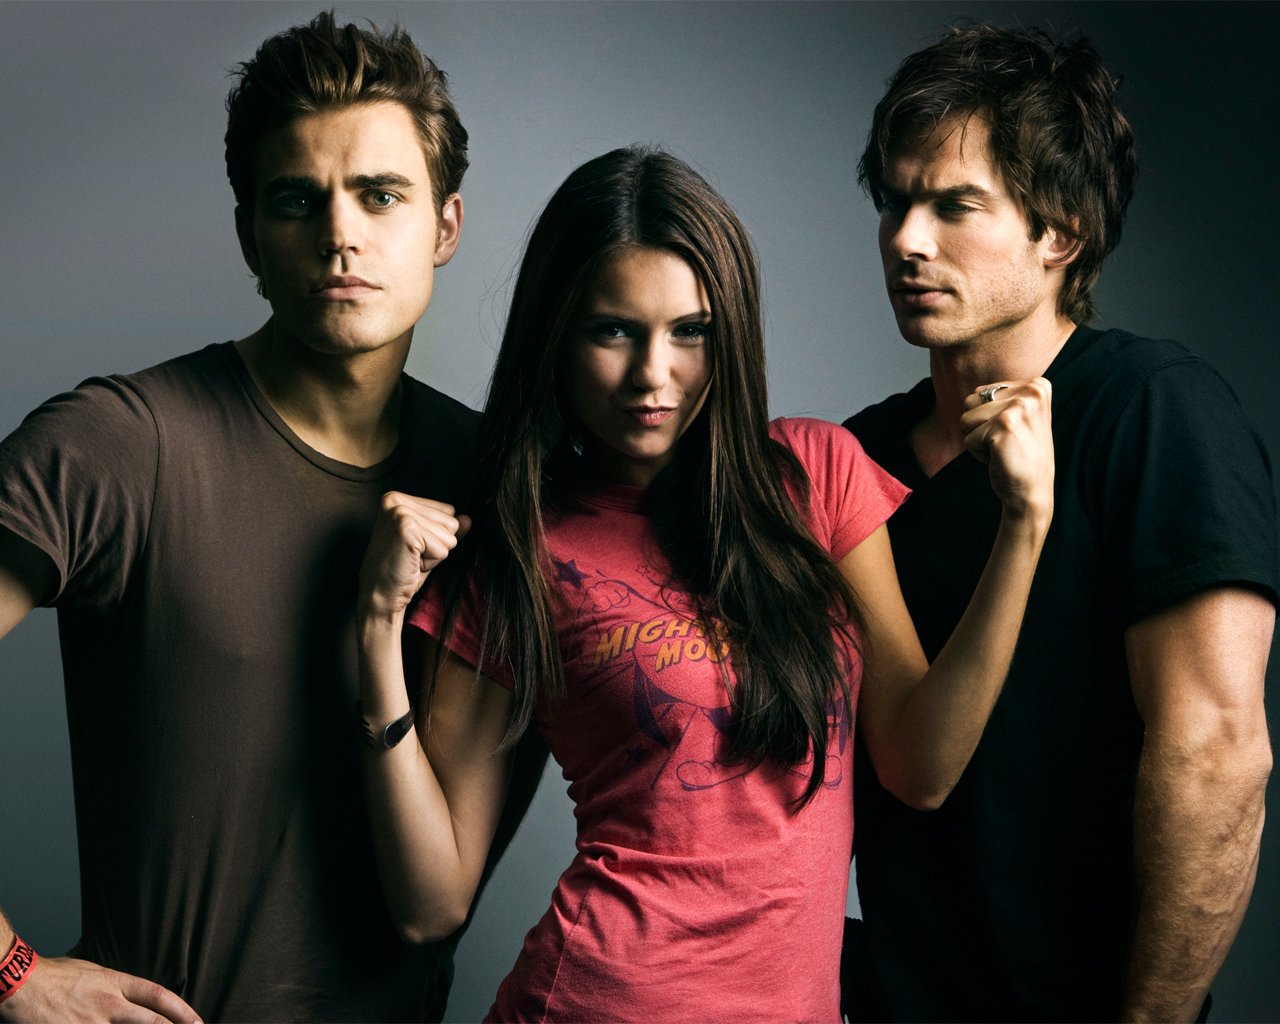 http://www.yidio.com/images/article/images/tvd-1.jpg